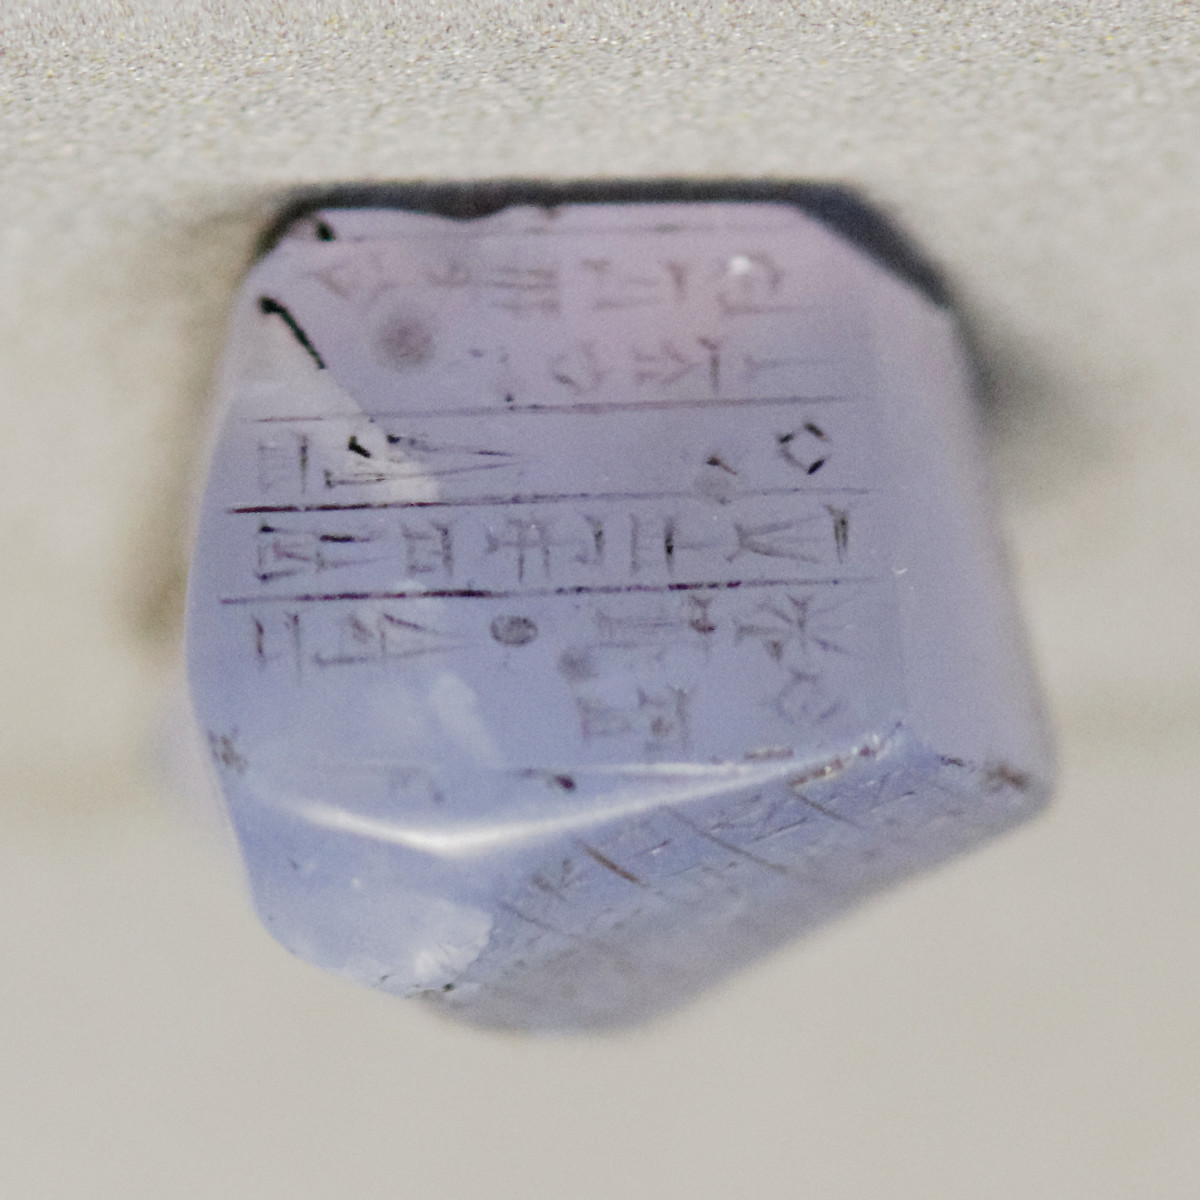 Actual inscribed Chacedony in ancient cuneiform script.